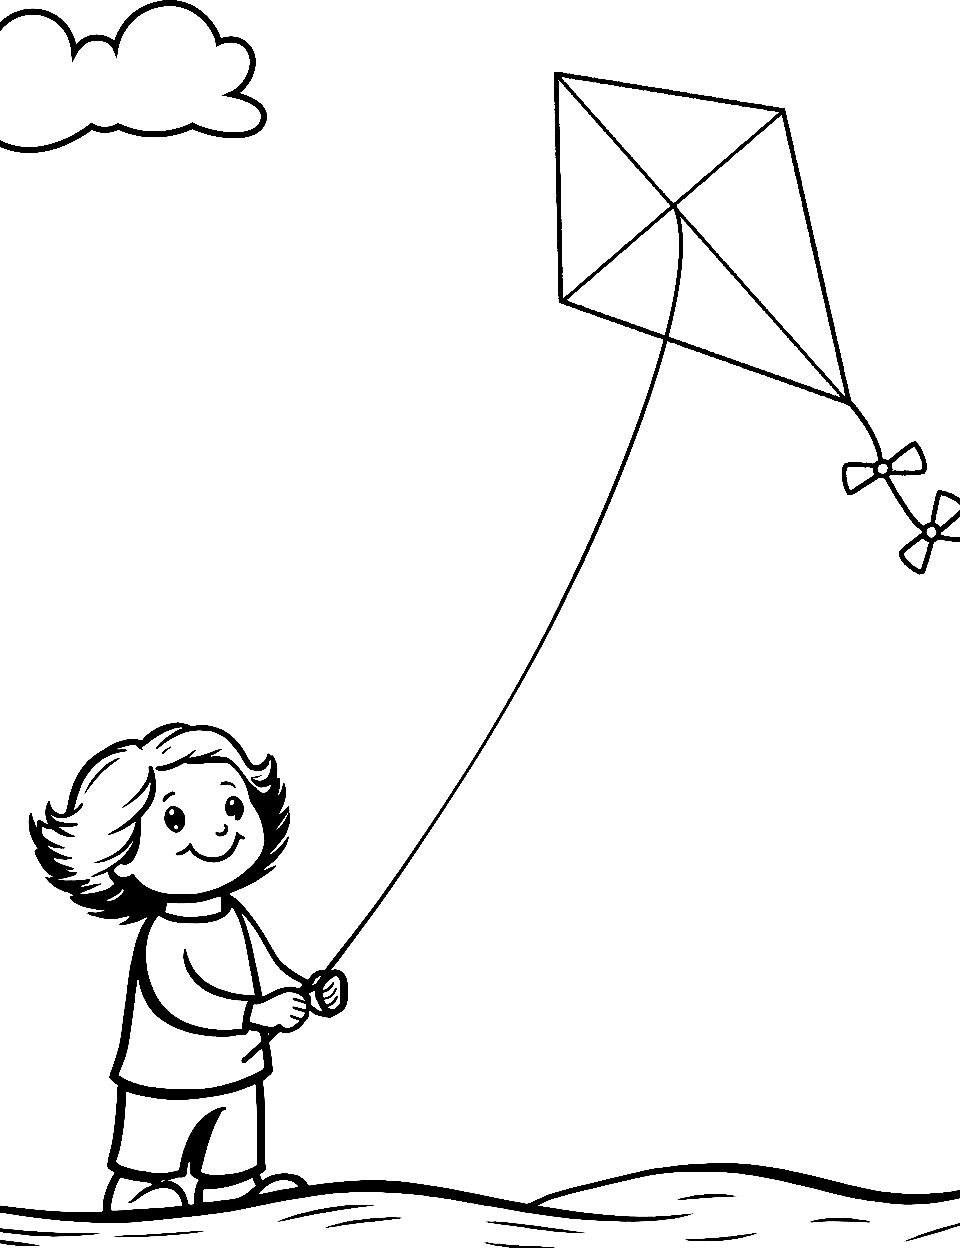 Kite in the Sky Coloring Page - A kid flying a kite soaring high in the sky with a long tail.